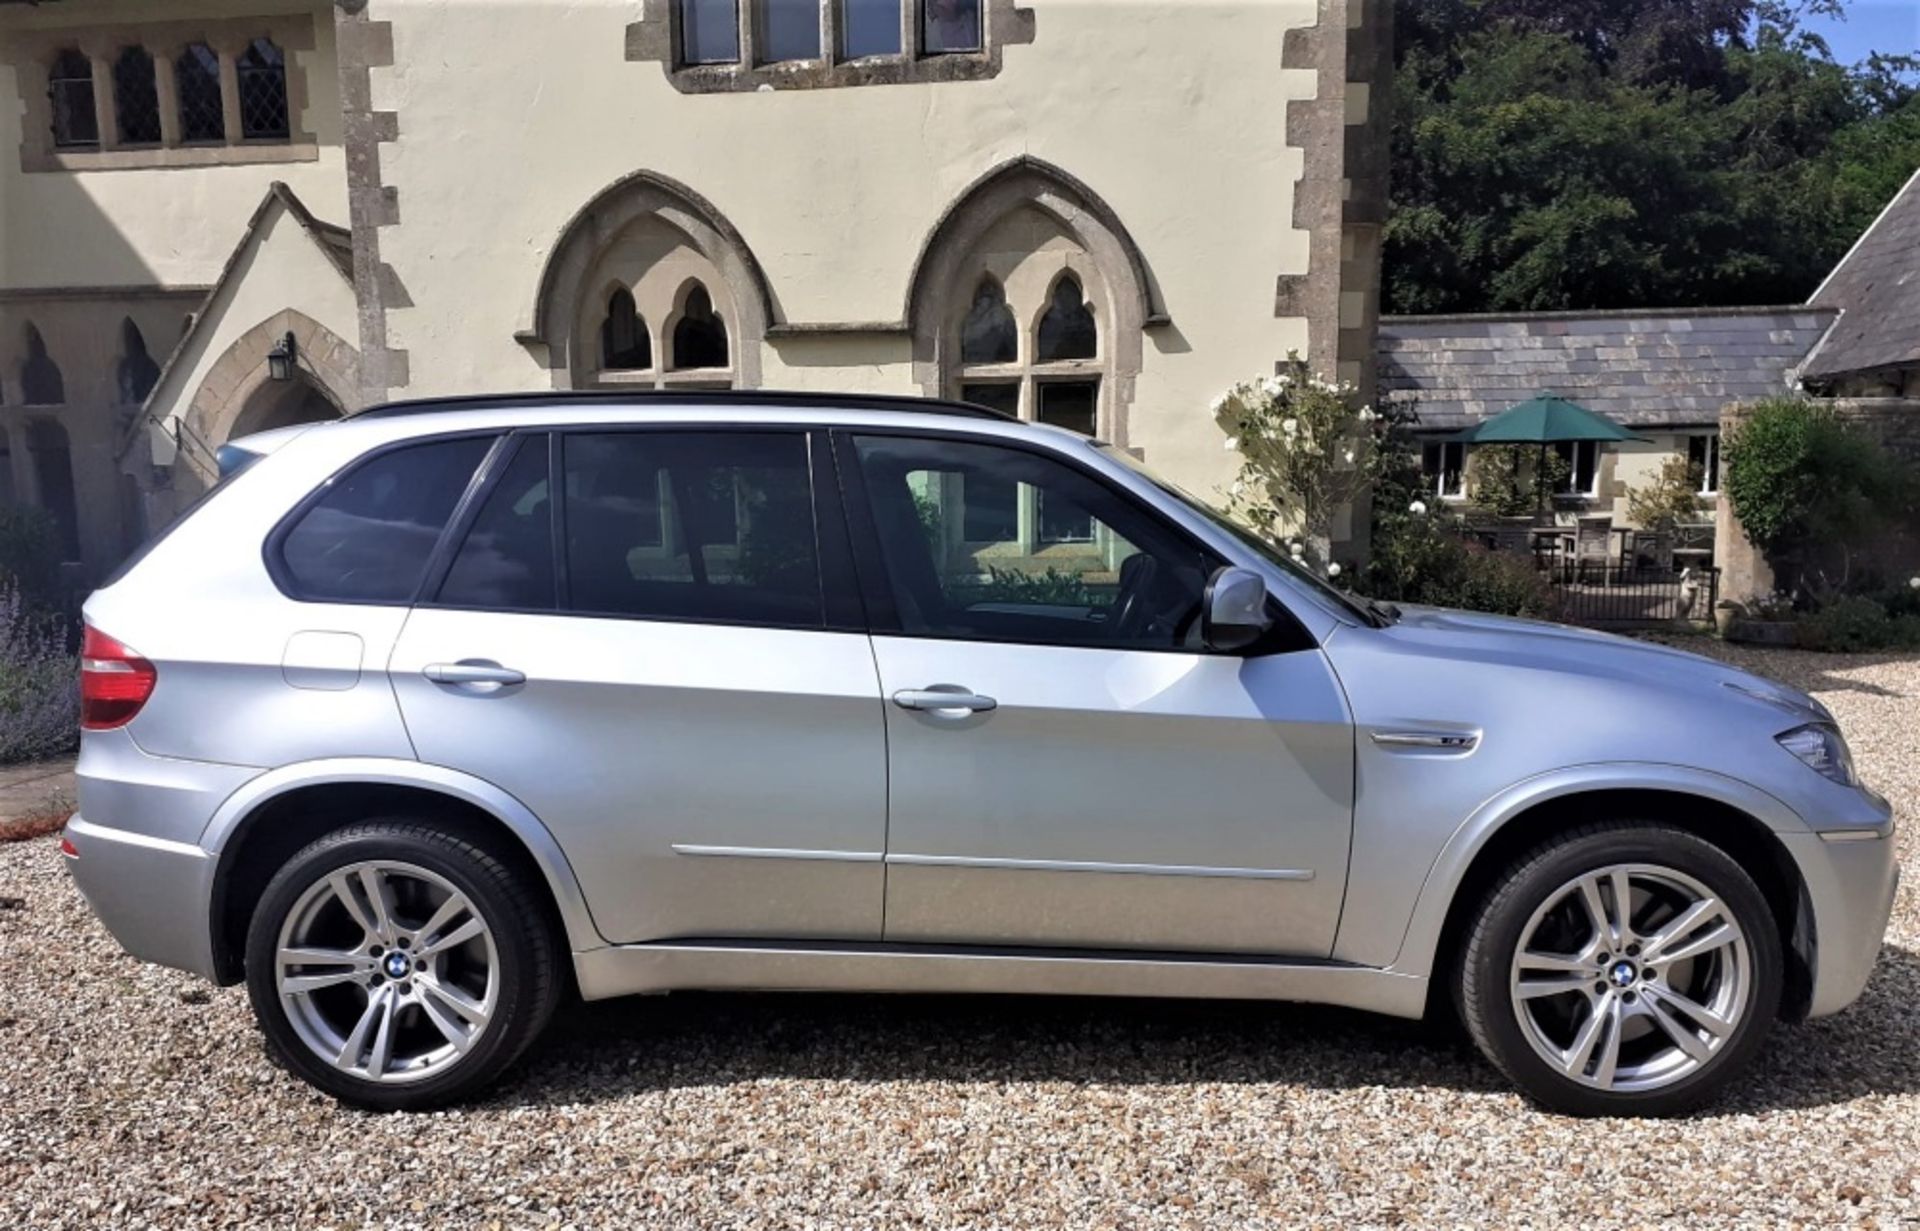 2009 BMW X5 M Registration Number:YH59 FFM Chassis Number: TBA Recorded Mileage: 125,000 miles - Two - Image 4 of 17